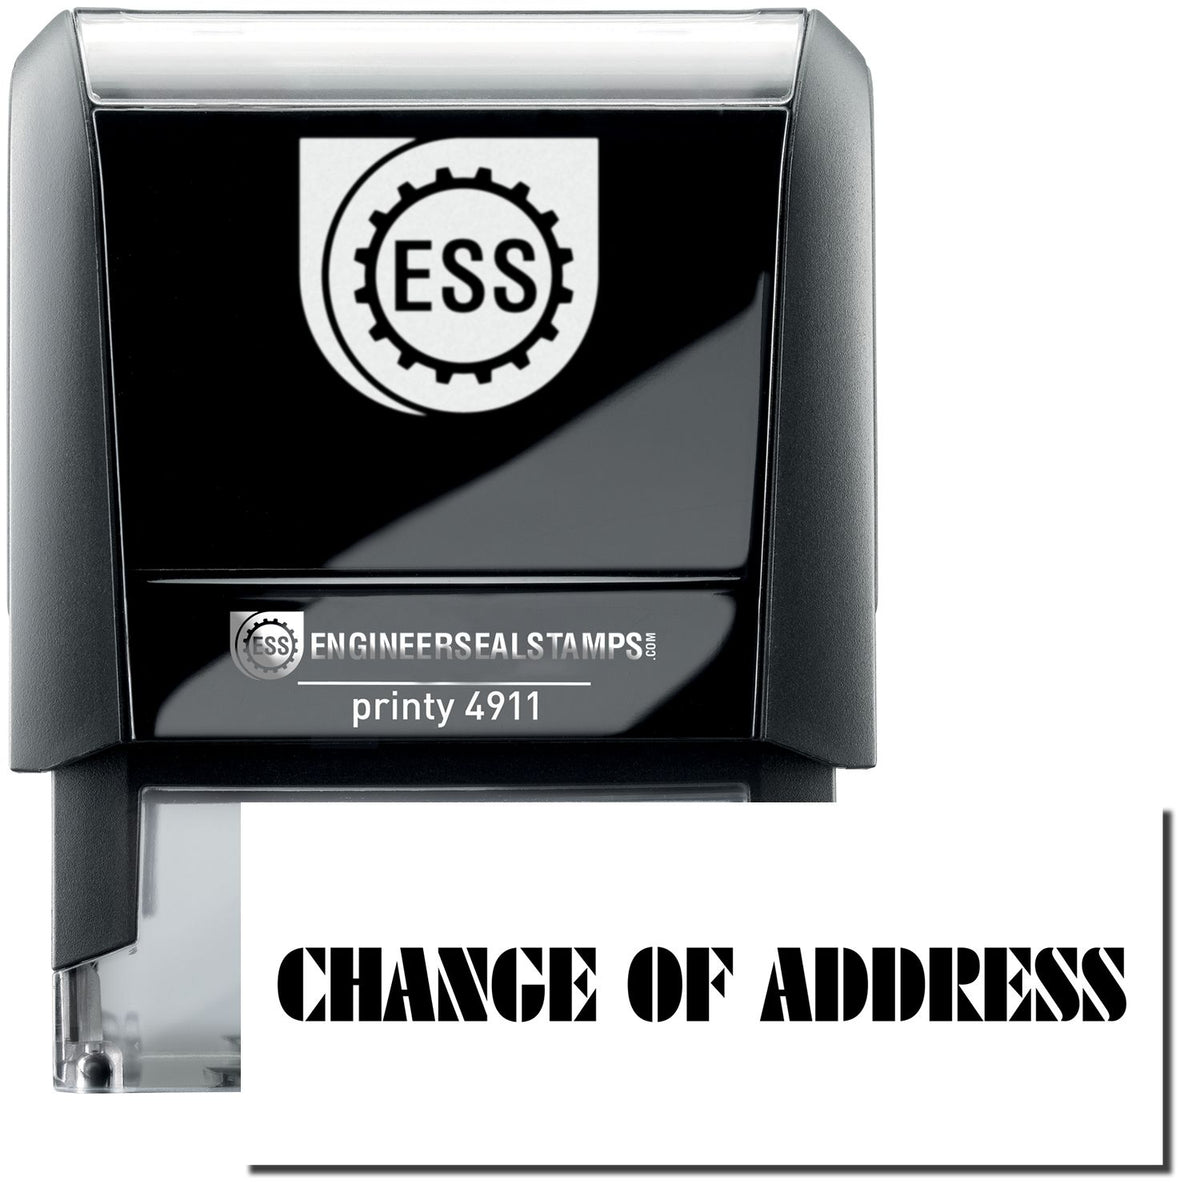 A self-inking stamp with a stamped image showing how the text &quot;CHANGE OF ADDRESS&quot; is displayed after stamping.